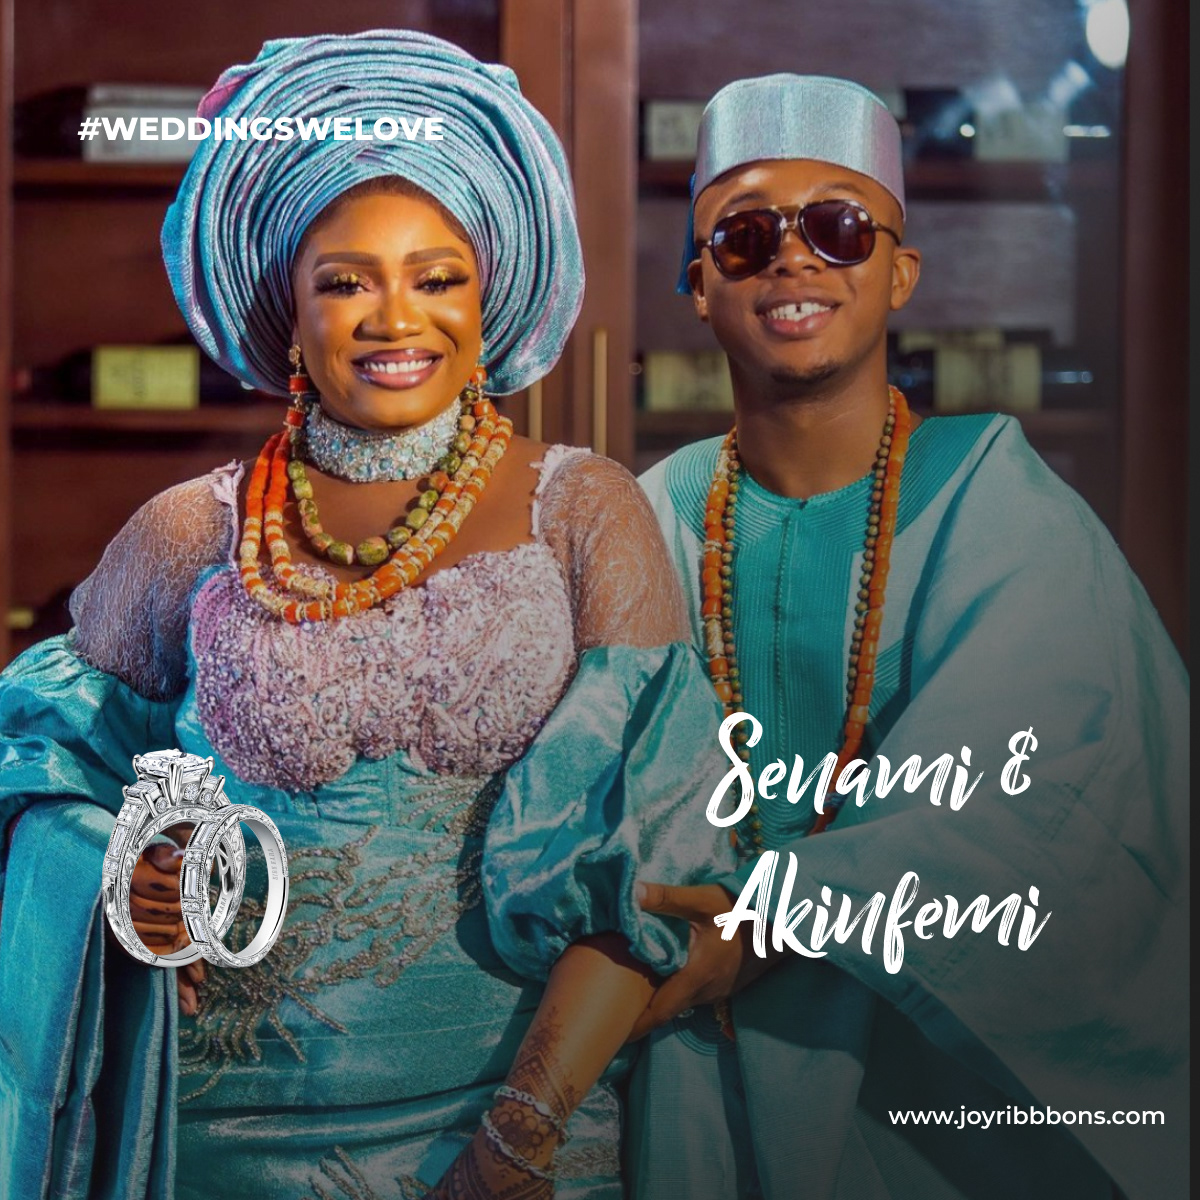 JoyRibbons is the home of all things weddings in Nigeria. We provide an easy-to-use wedding and gift registry
          for about to wed couples. Enjoy some of the Weddings We Love at JoyRibbons with these series